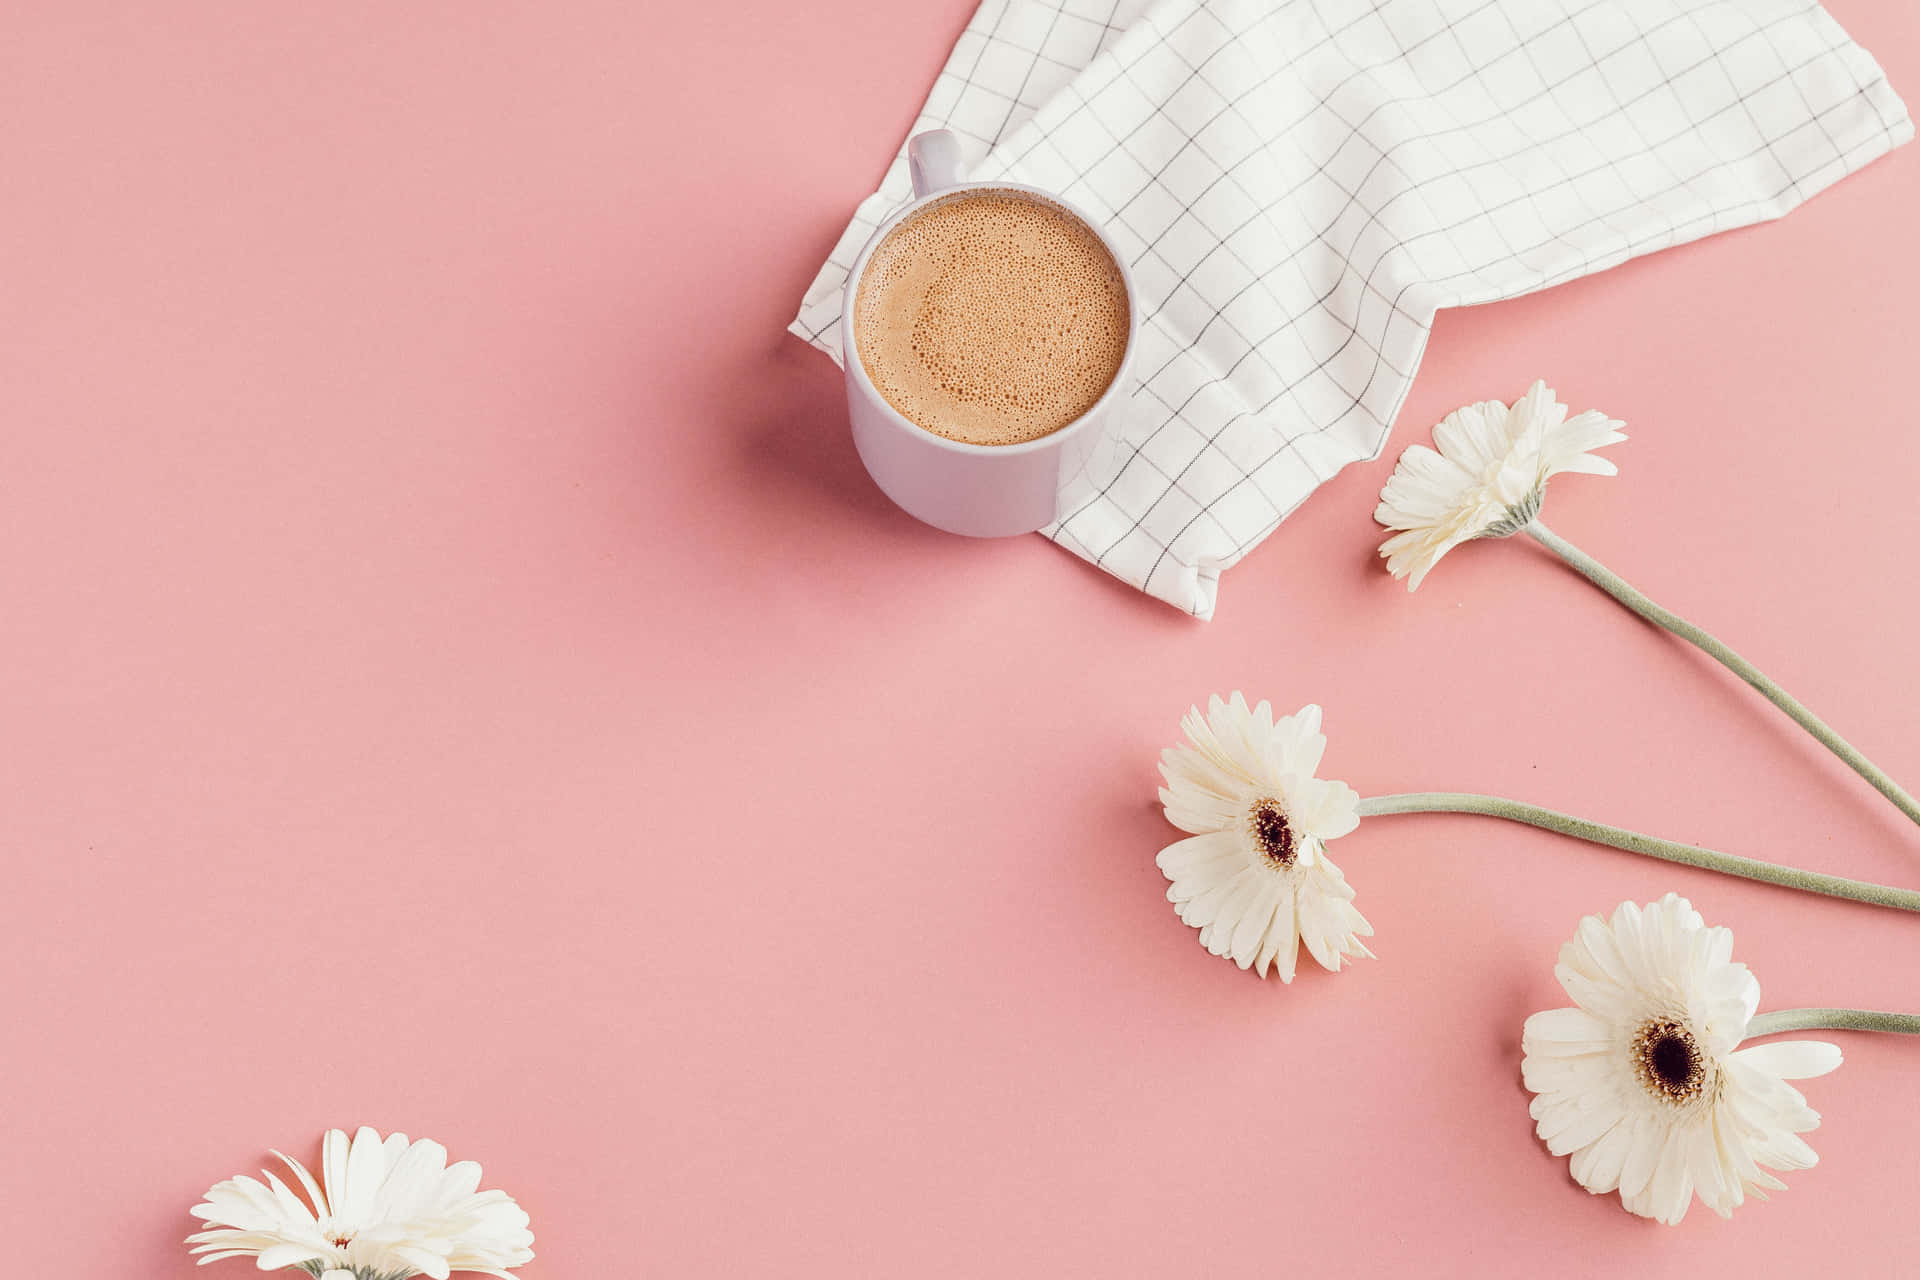 Pink Aesthetic Coffeeand Flowers Wallpaper